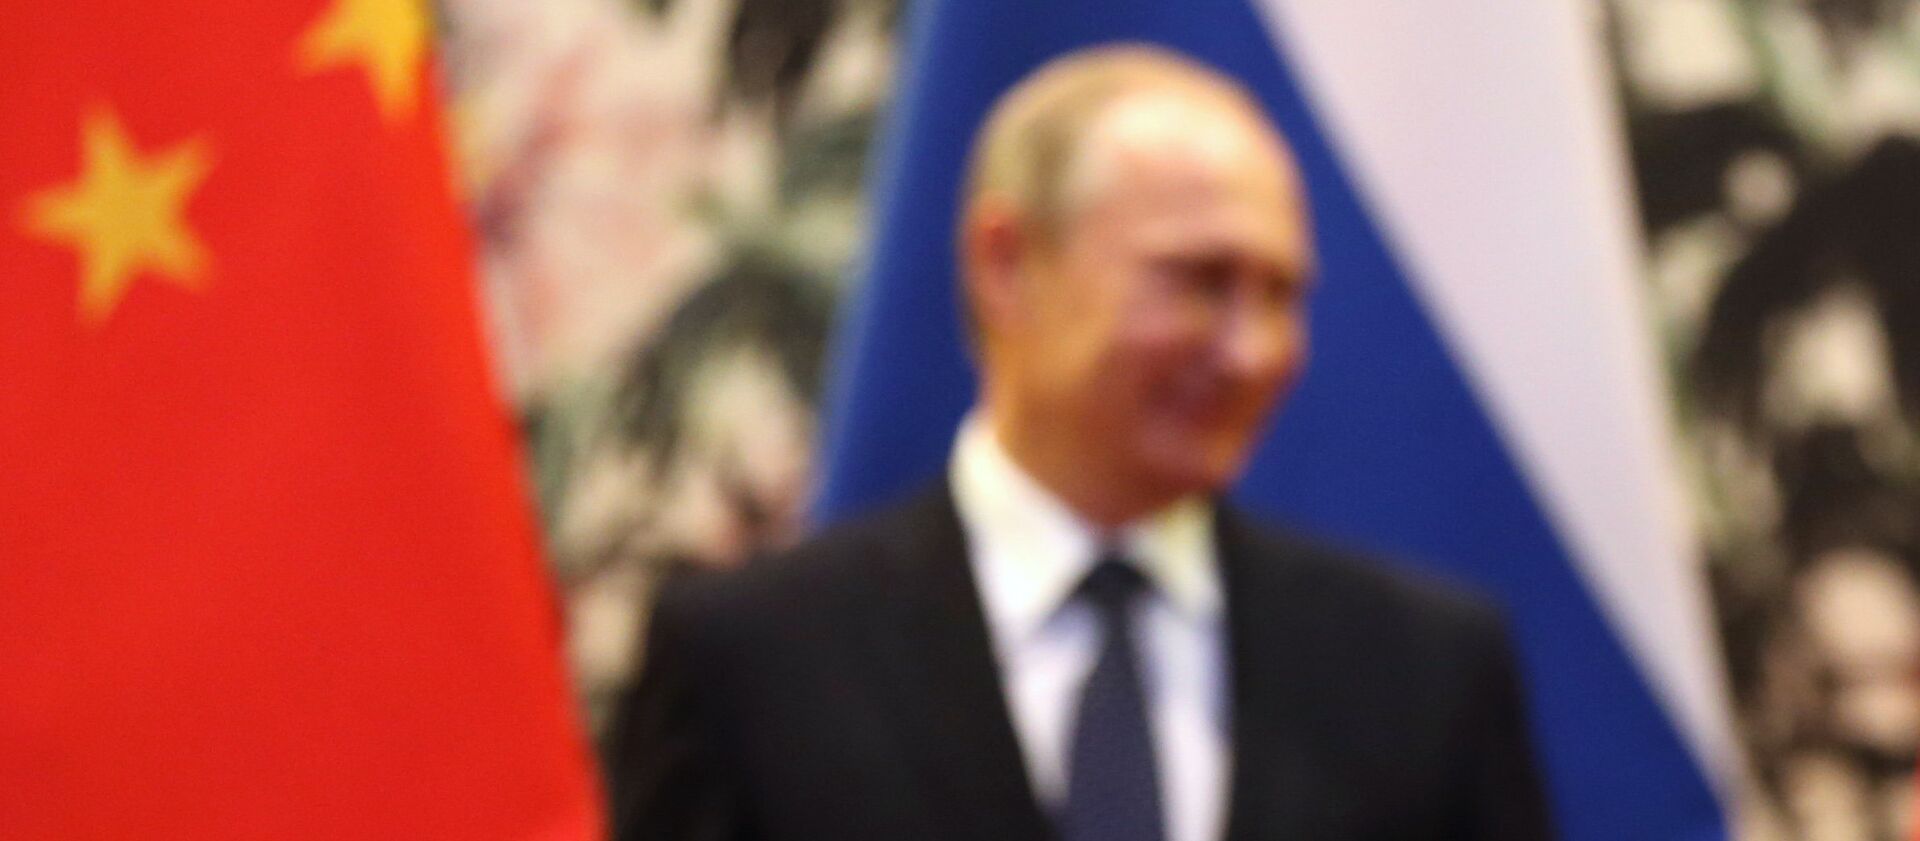 The Russian and Chinese national flags are seen on the table as Russia's President Vladimir Putin (back L) and his China's President Xi Jinping (back R) stand during a signing ceremony at the Diaoyutai State Guesthouse in Beijing on November 9, 2014. - Sputnik International, 1920, 14.10.2020